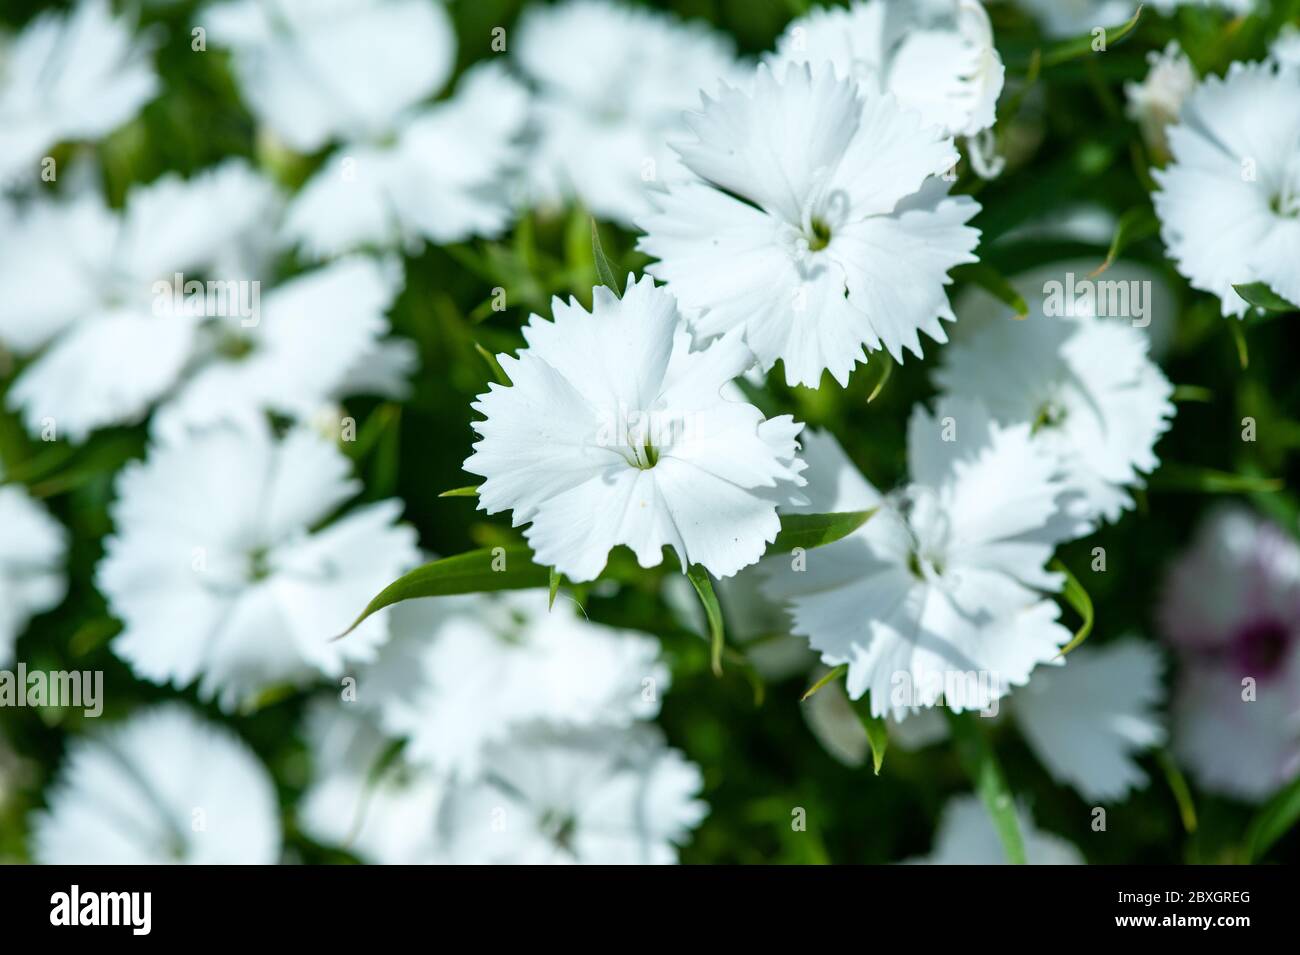 White Dianthus flowers, chinensis clove,  sweet william flower in the garden Stock Photo